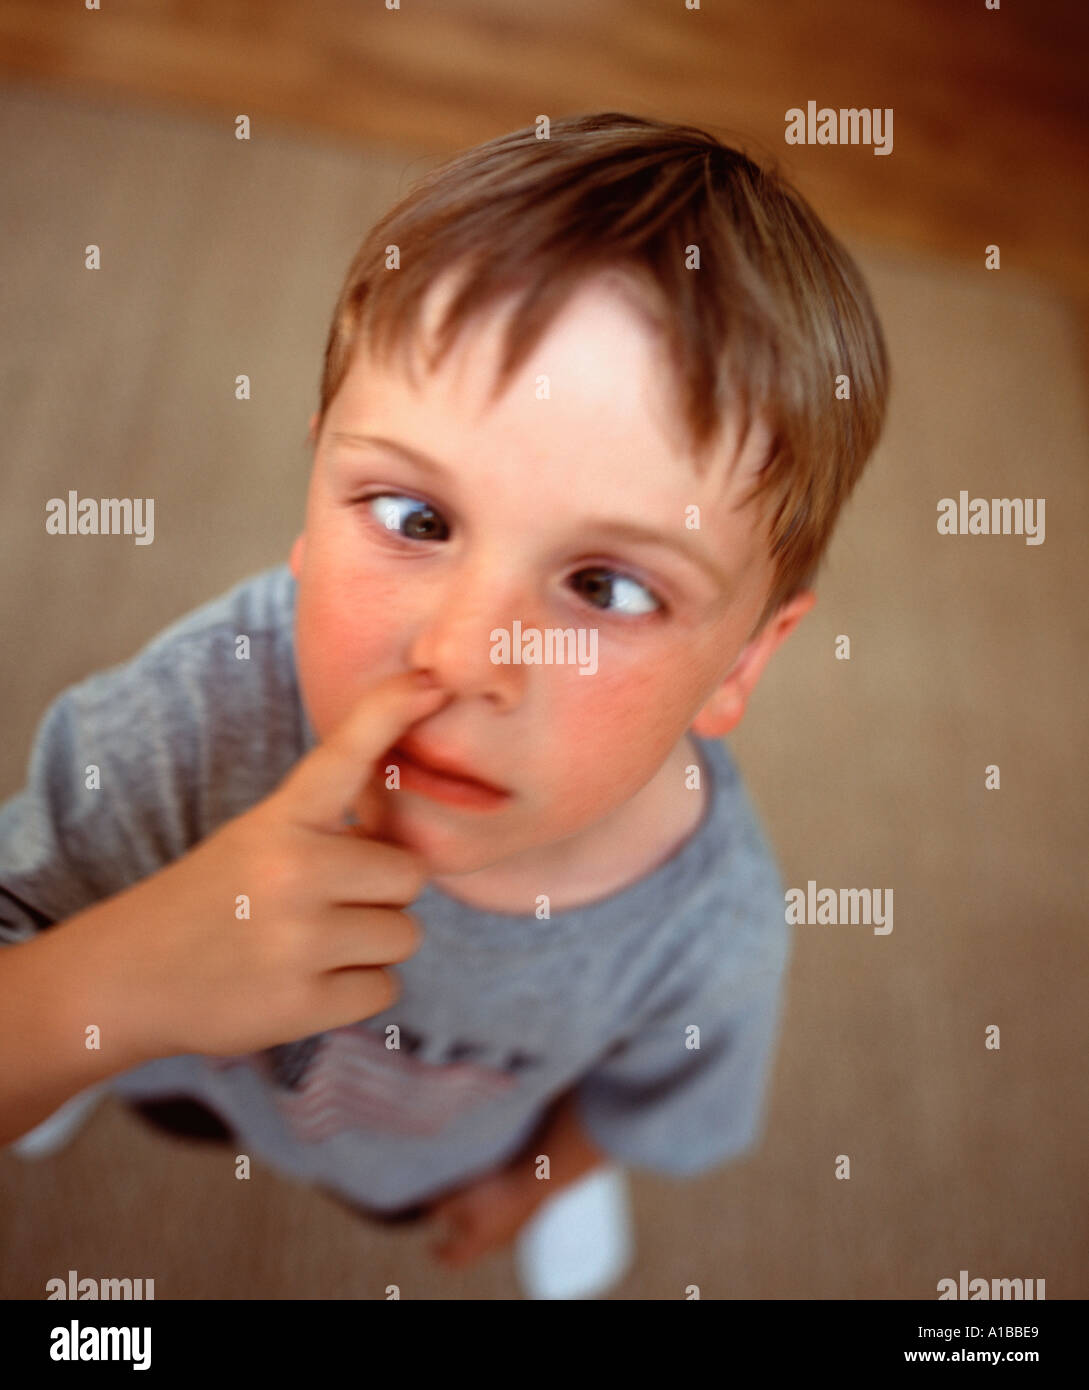 child making a cross eyed face while playing with nose Stock Photo